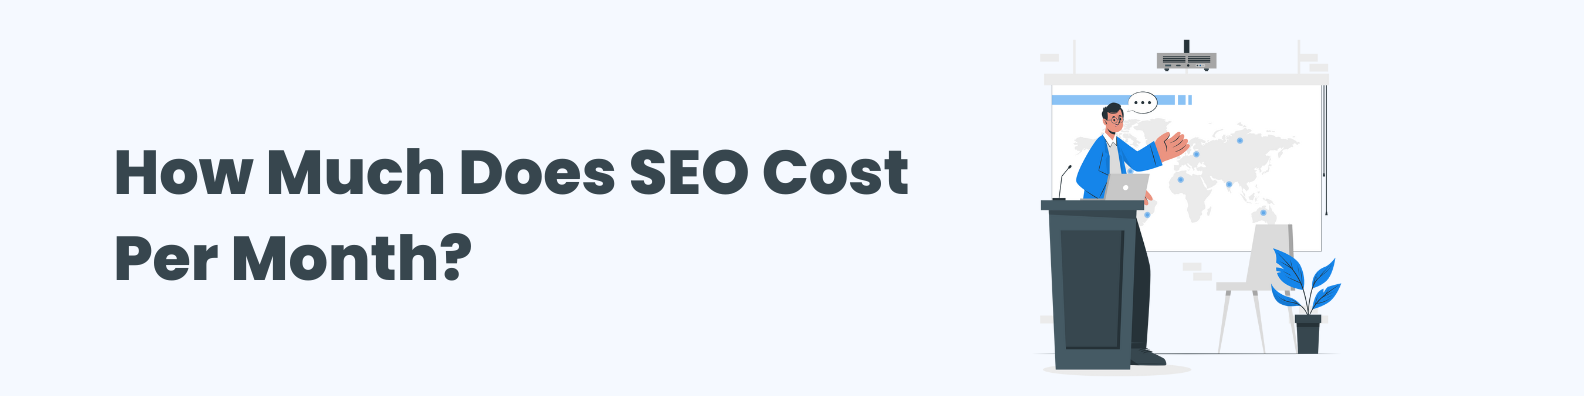 How much does SEO cost per month?